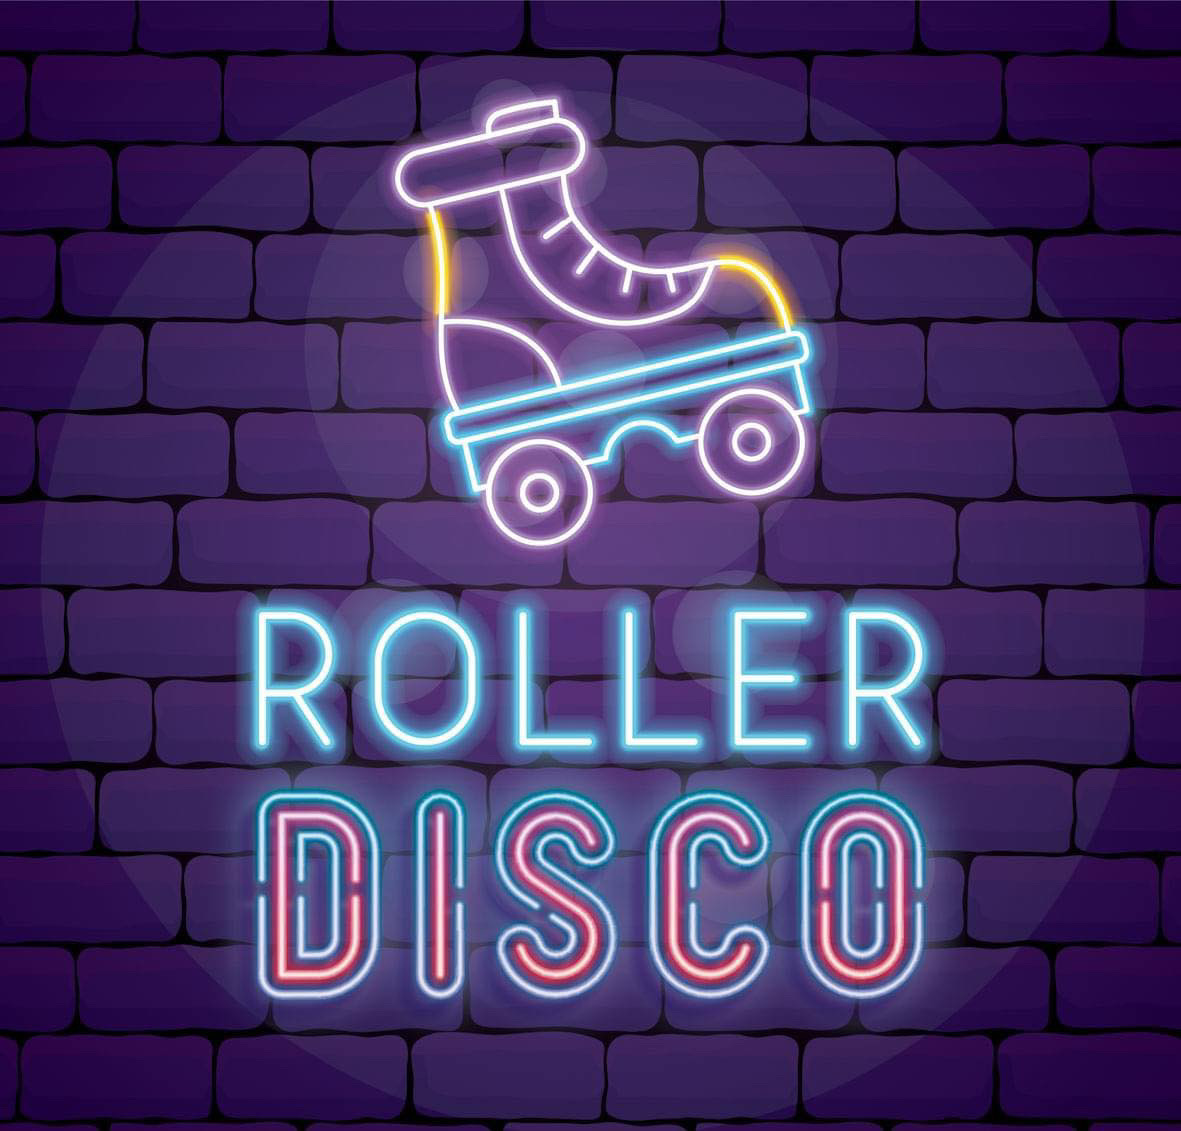 Warriors will host a Roller Disco in Alfreton on August 28